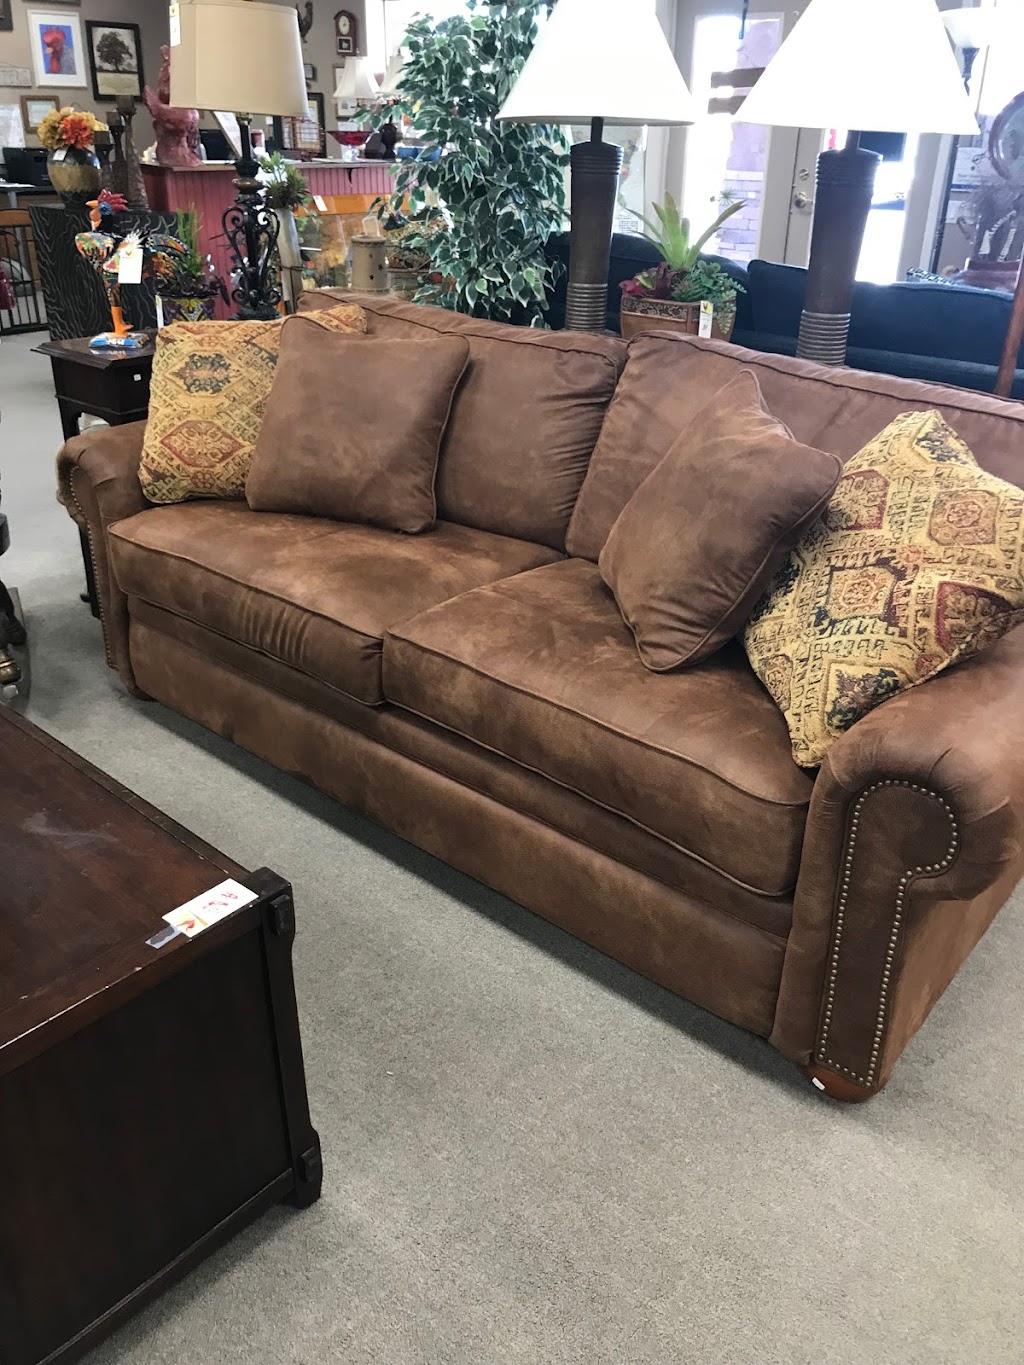 Red Rooster Consignment Furniture | Photo 1 of 10 | Address: 5959 E Southern Ave, Mesa, AZ 85206, USA | Phone: (480) 832-9404